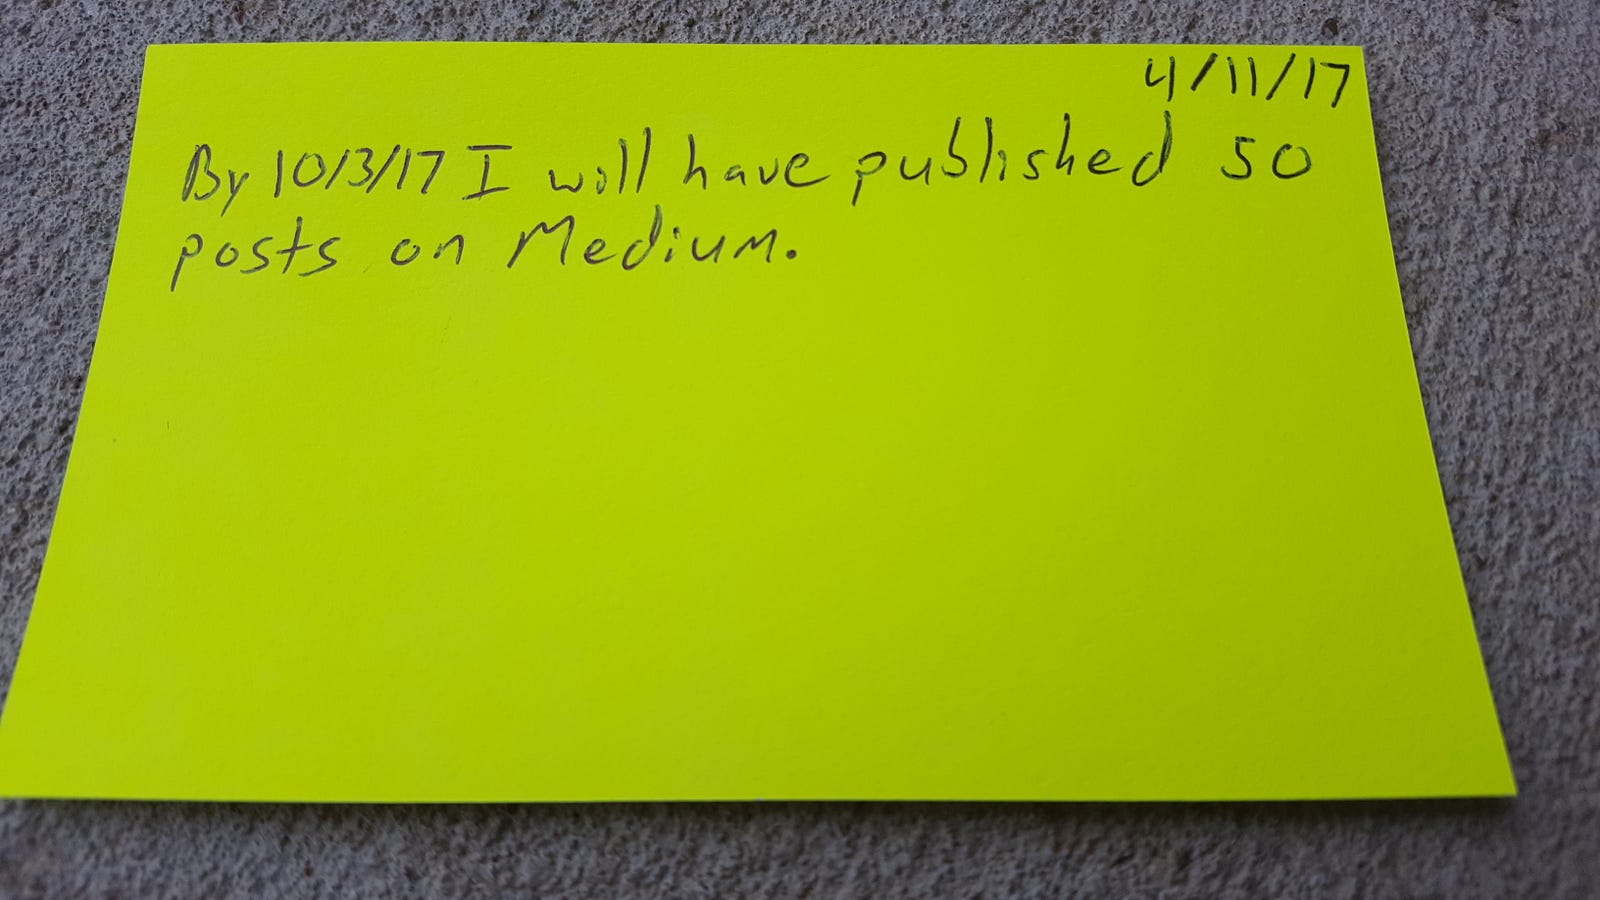 Notecard that reads "By 10/3/17 I will have published 50 posts on Medium."